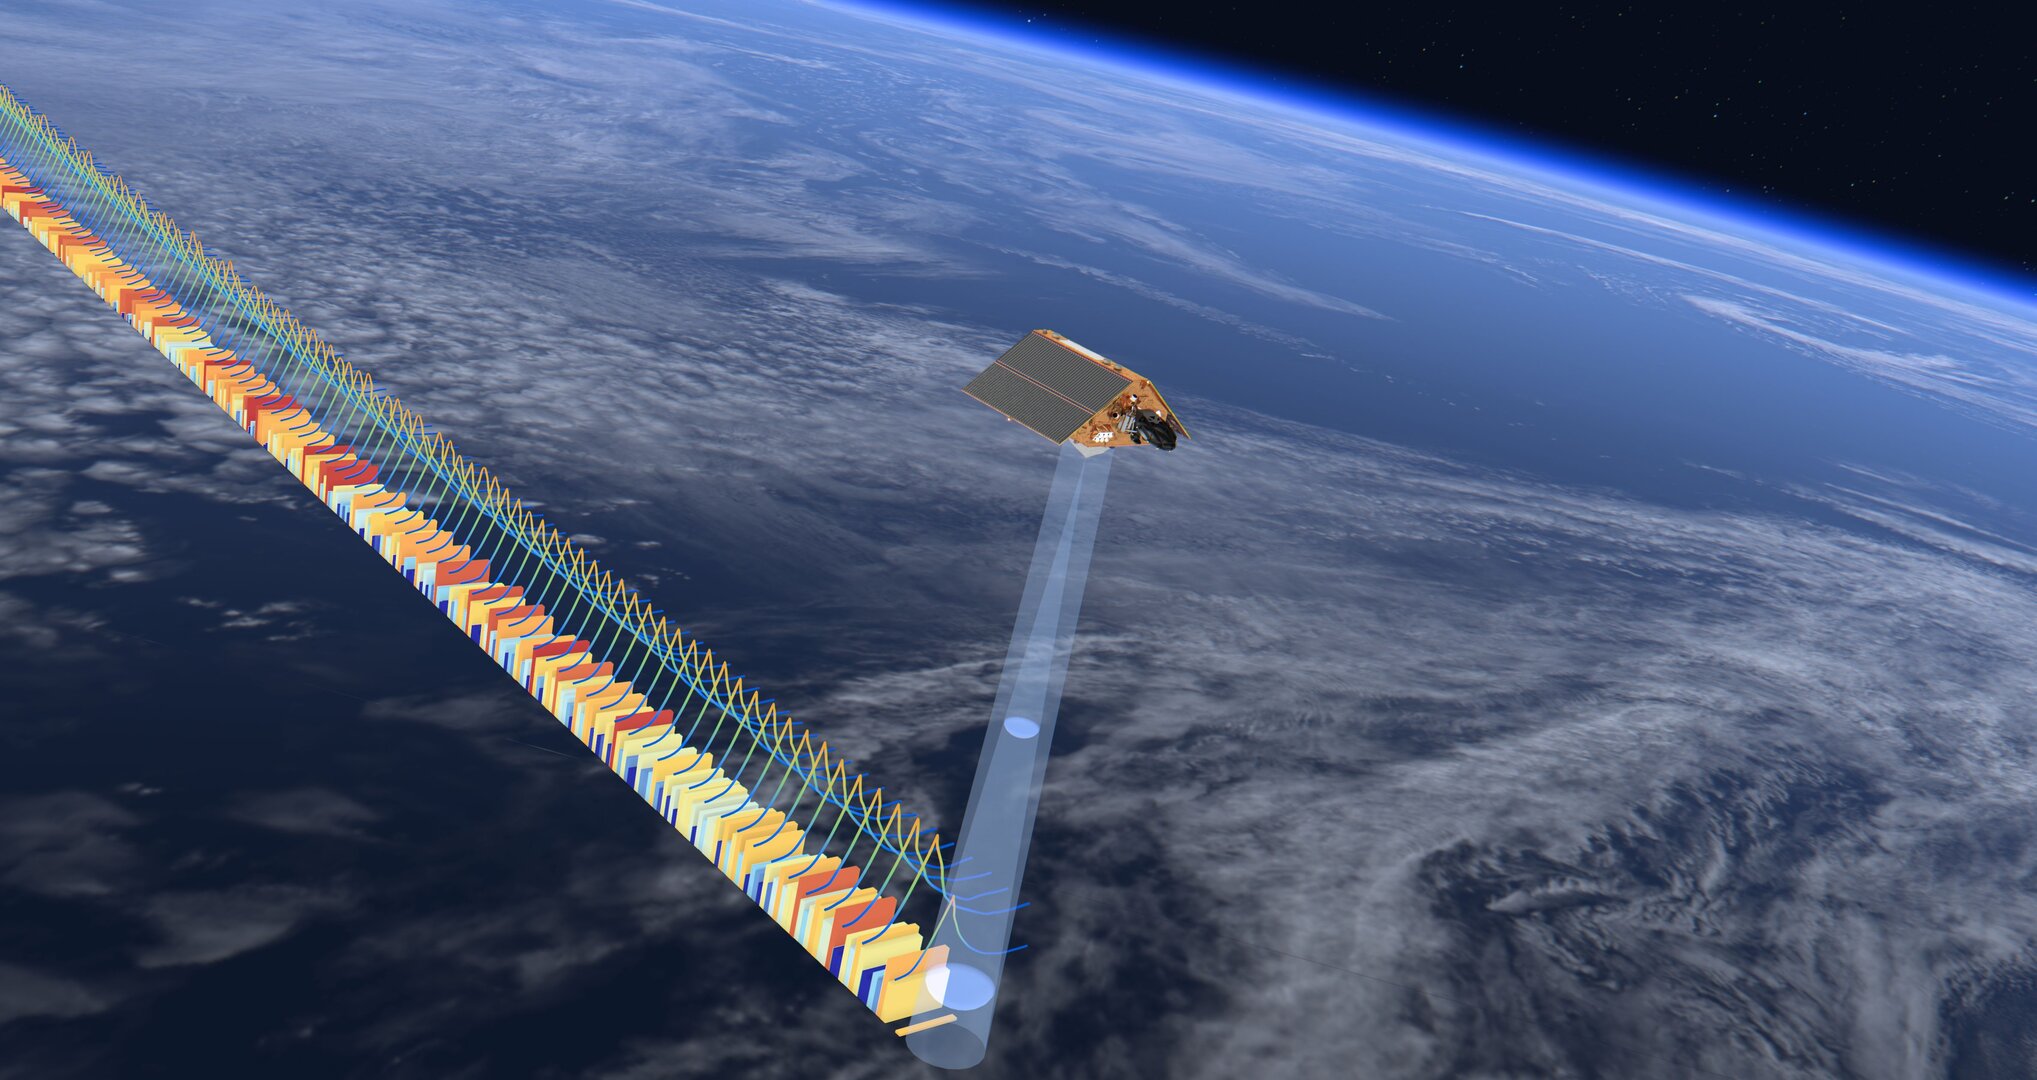 Satellites such as Sentinel 6 Michael Freilich carry advanced altimeters that allows it to make more precise measurements of global sea levels than its predecessors.